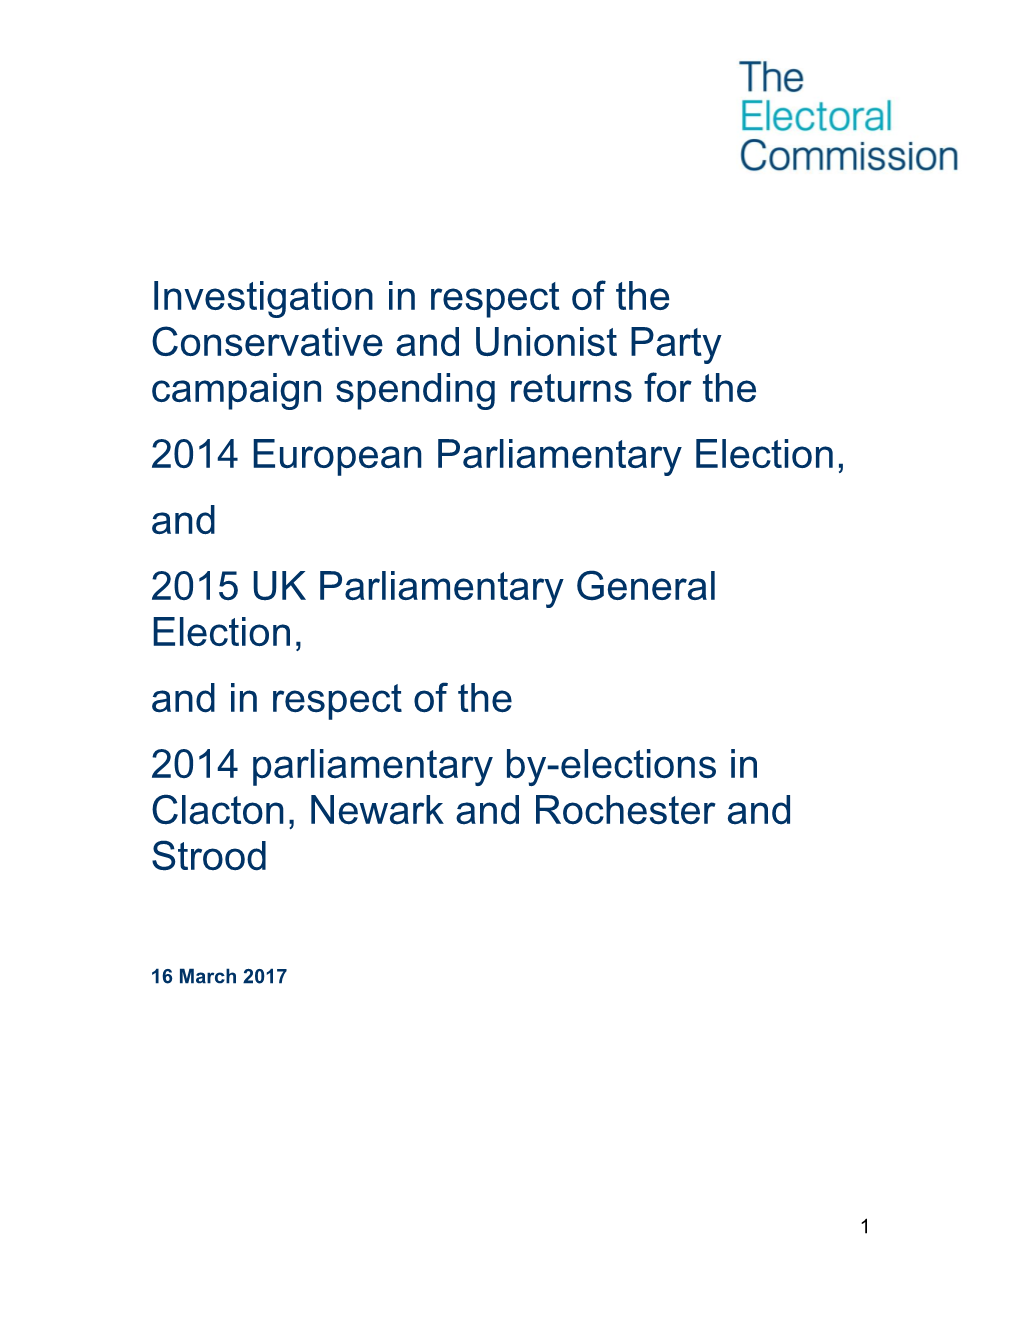 Investigation in Respect of the Conservative and Unionist Party Campaign Spending Returns for the 2014 European Parliamentary E